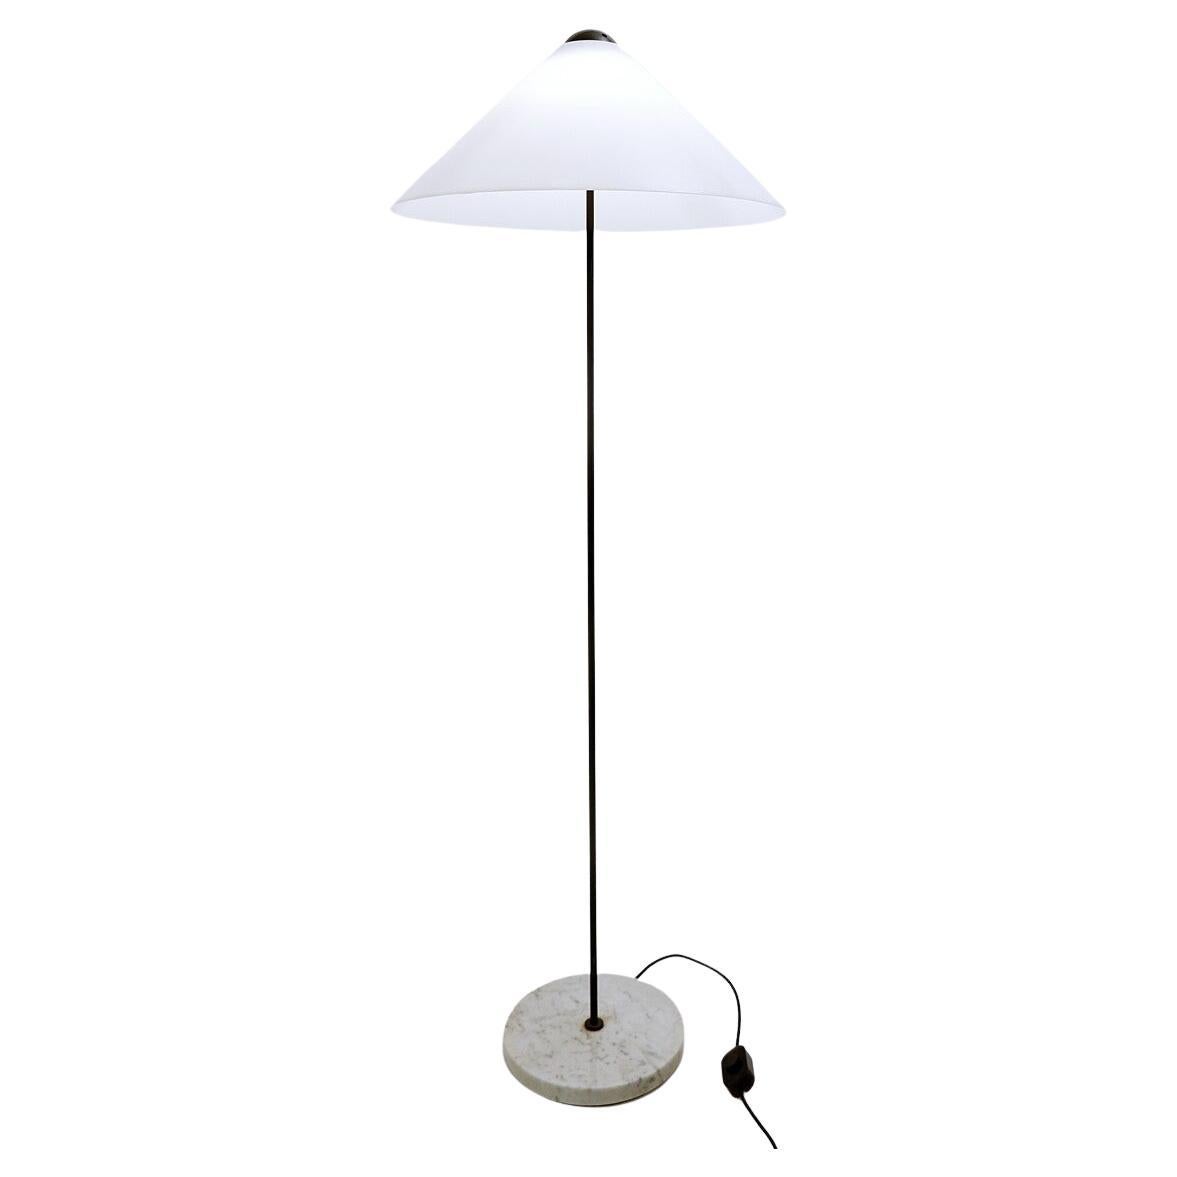 Mid-Century Modern Floor Lamp "Snow" by Vico Magistretti for O-Luce, Italy, 1970 For Sale